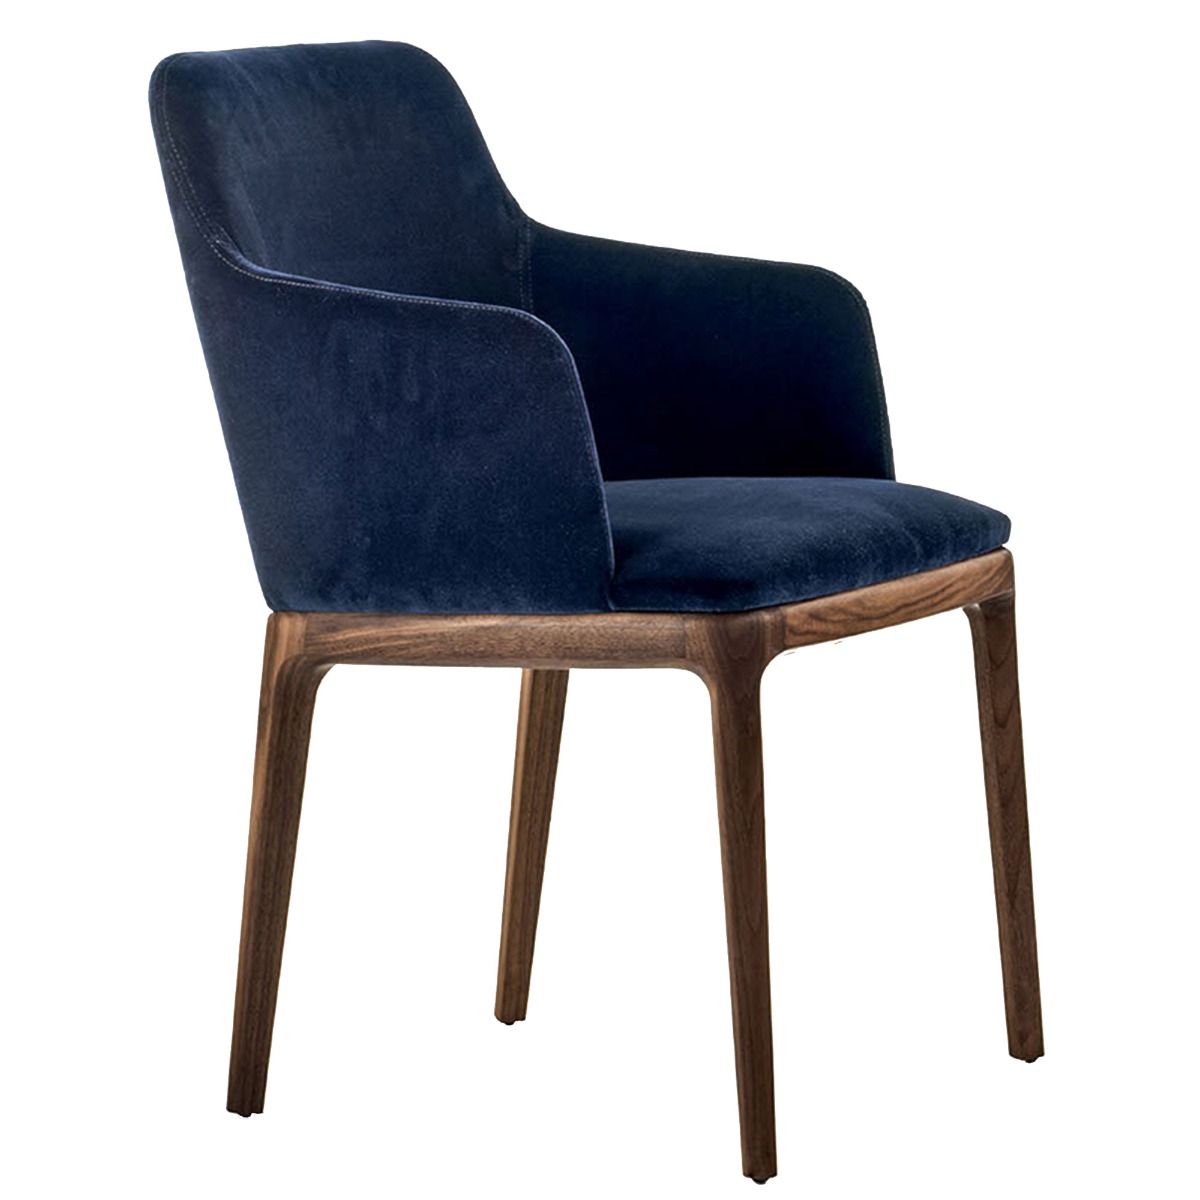 RIVA Cloe Dining Chair With Arm, Blue | Barker & Stonehouse